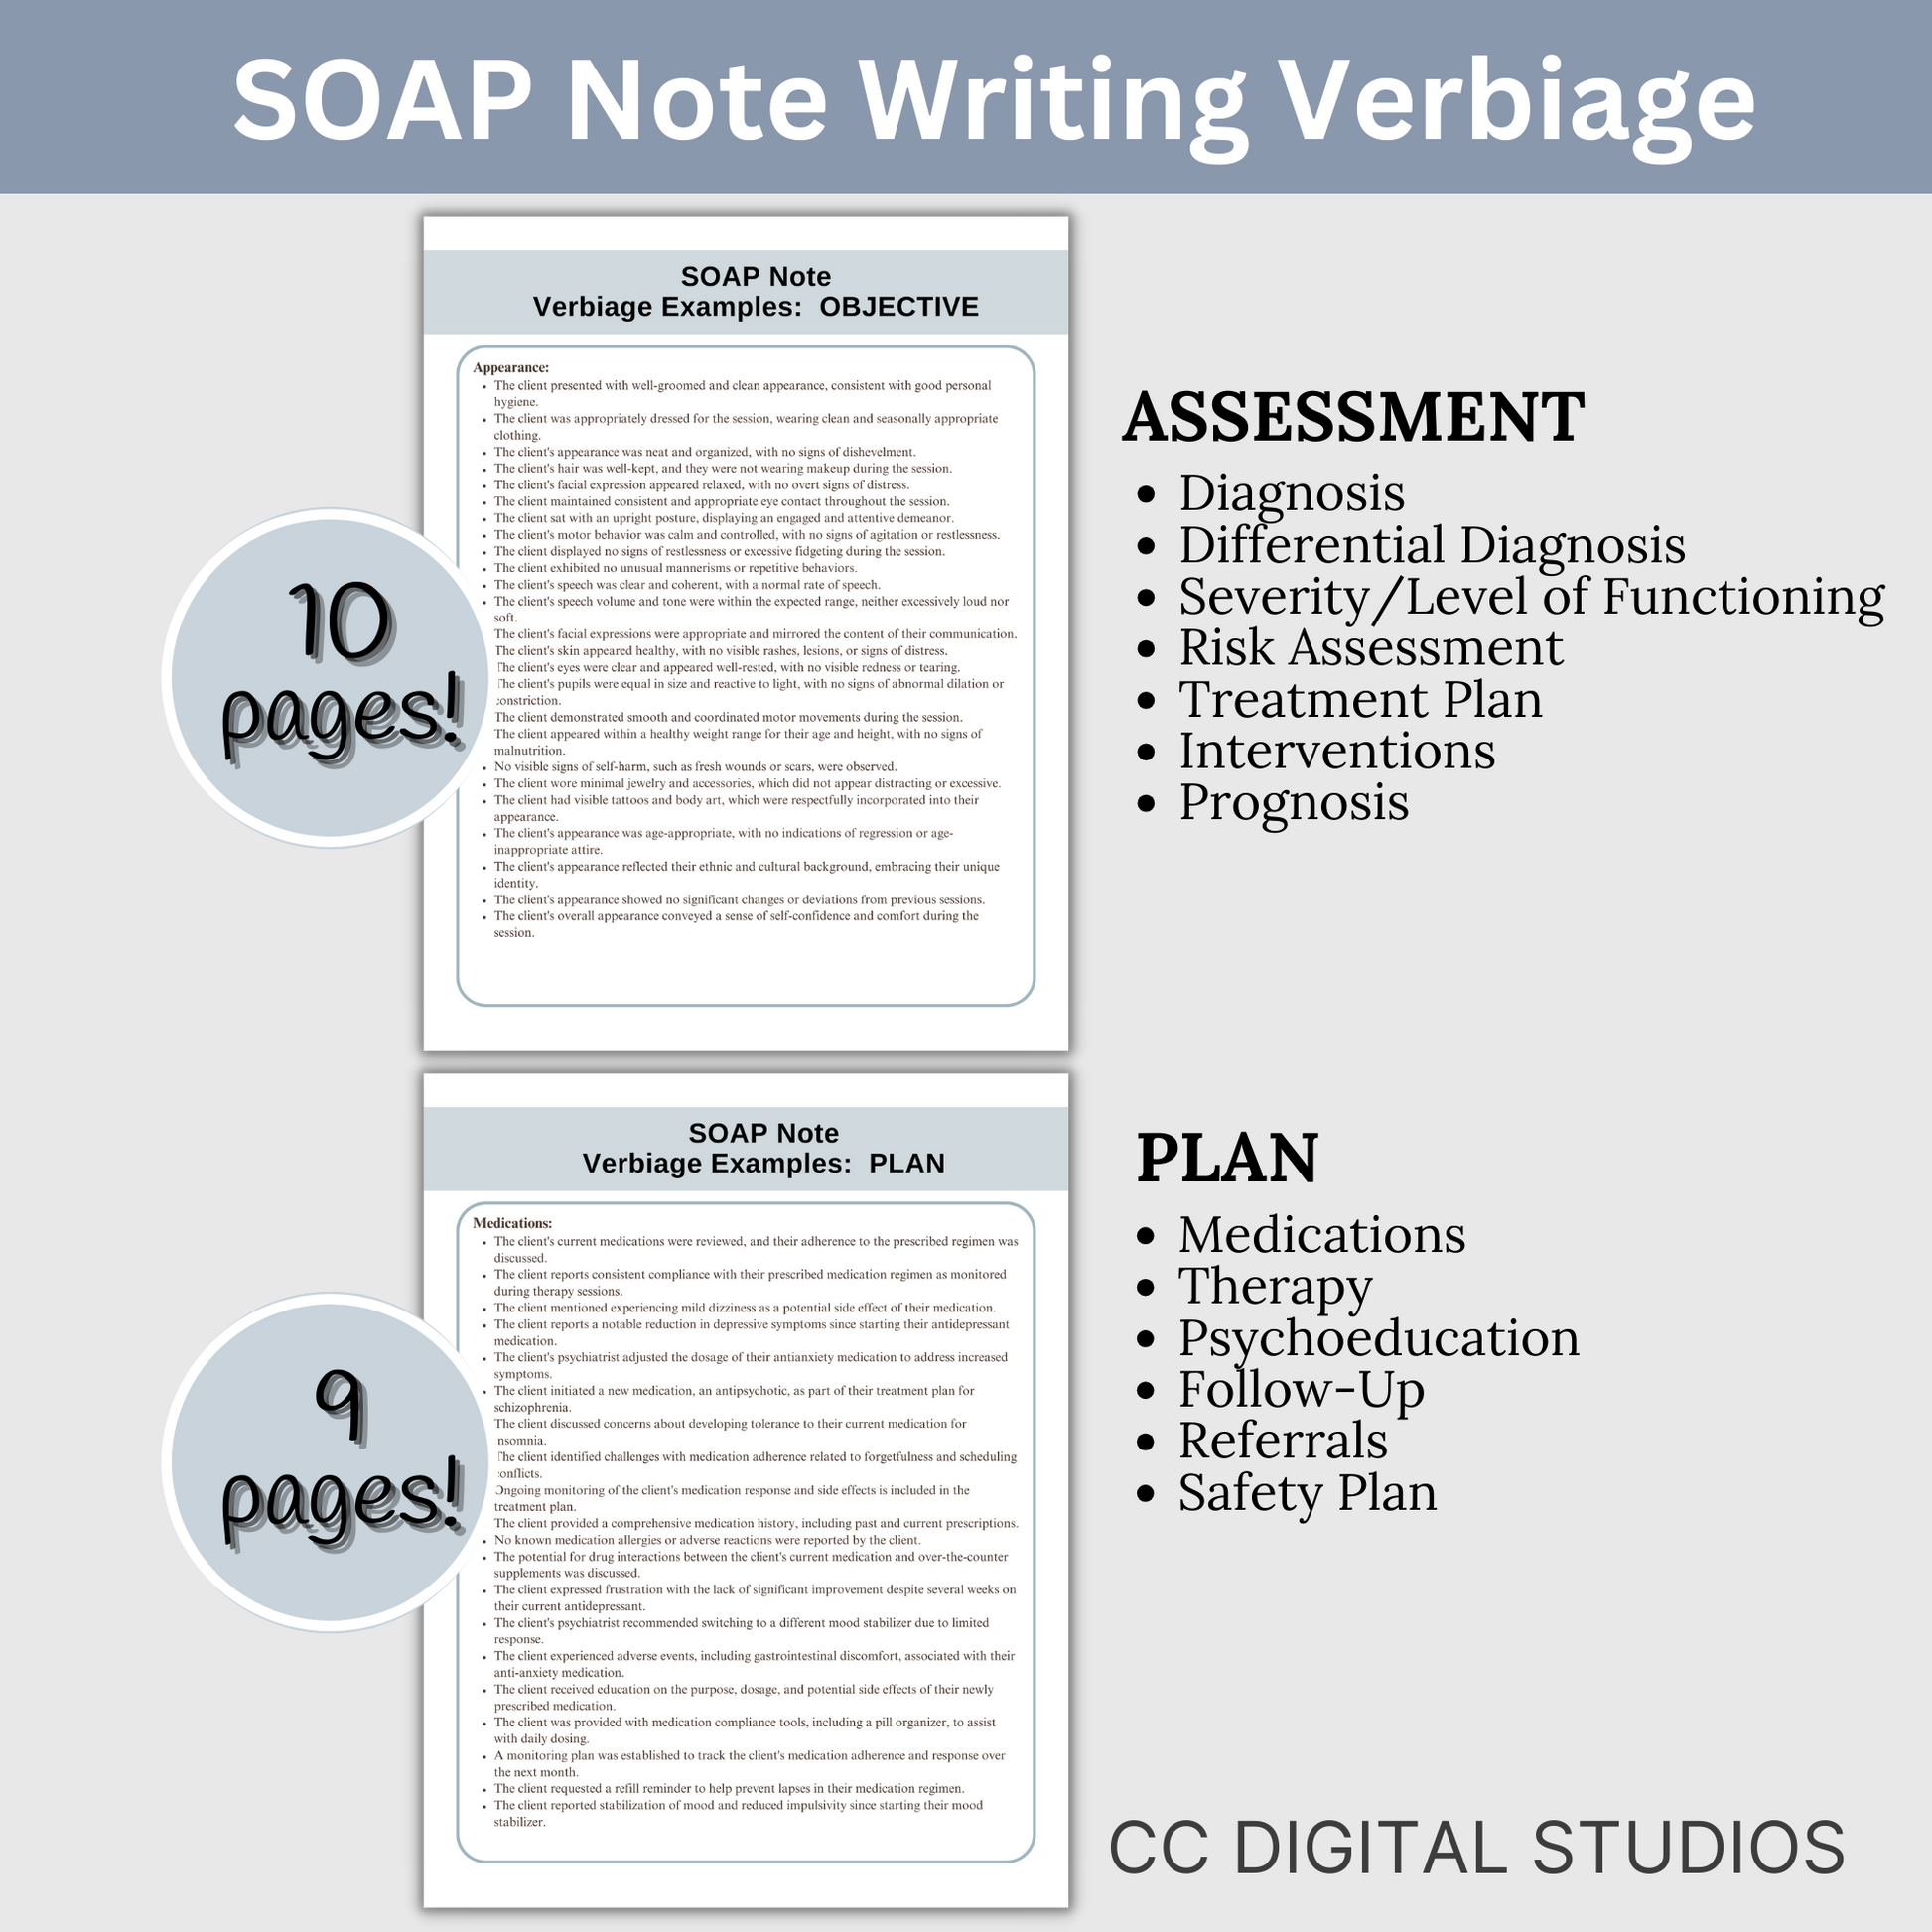 SOAP Note Guide tailored specifically for mental health therapists – your ultimate companion for efficient and organized documentation. Designed to streamline your therapy notes with user-friendly prompts and insightful examples